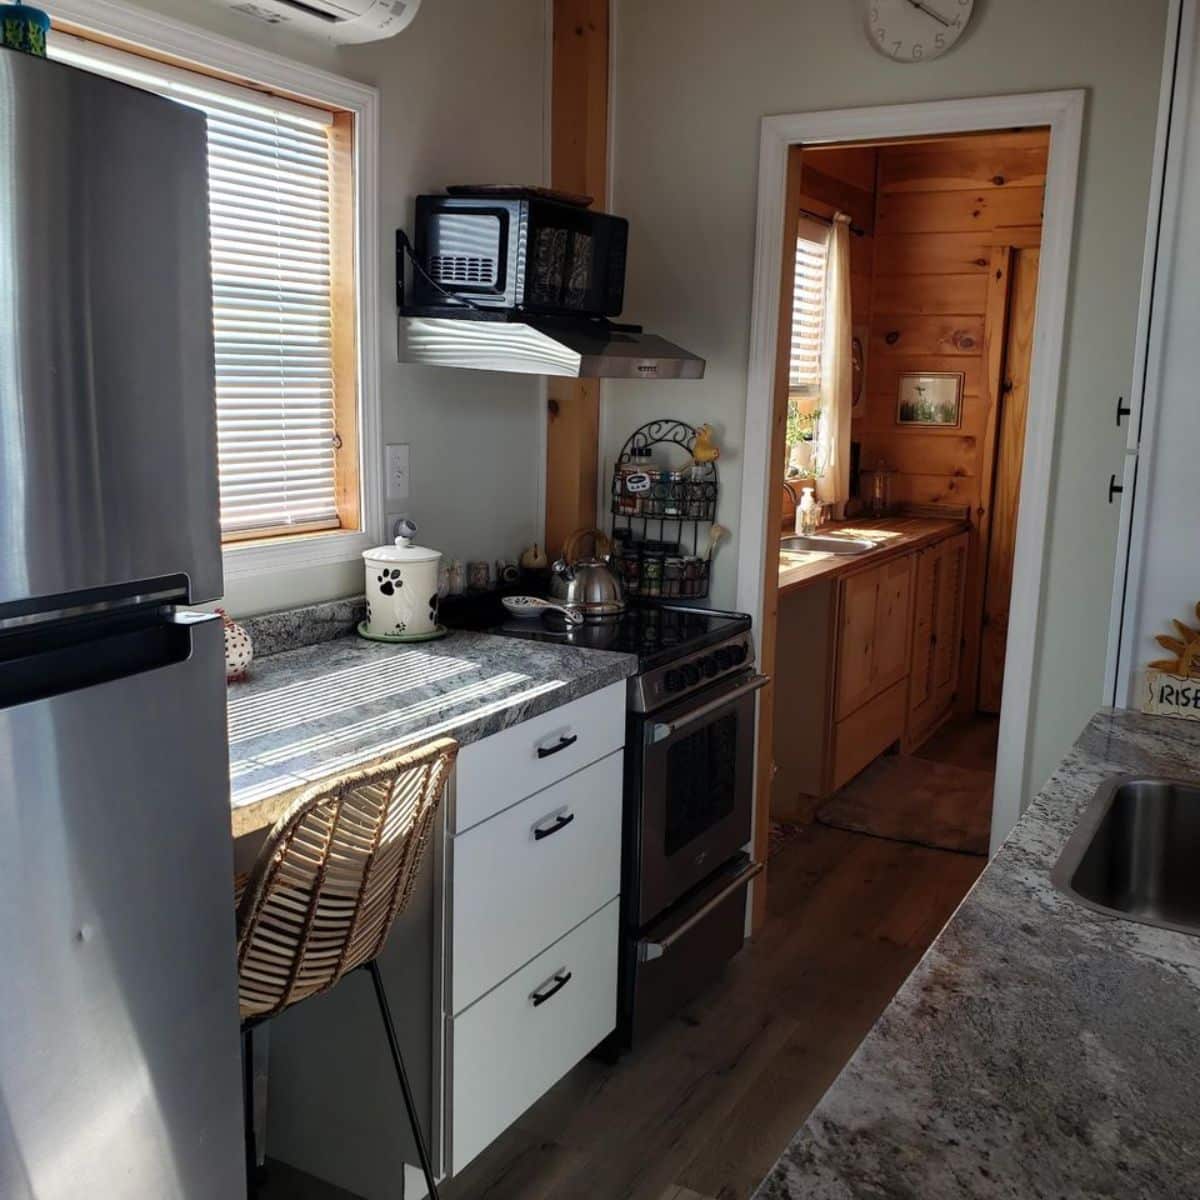 opposite side is double door refrigerator, stove and oven with storage cabinets